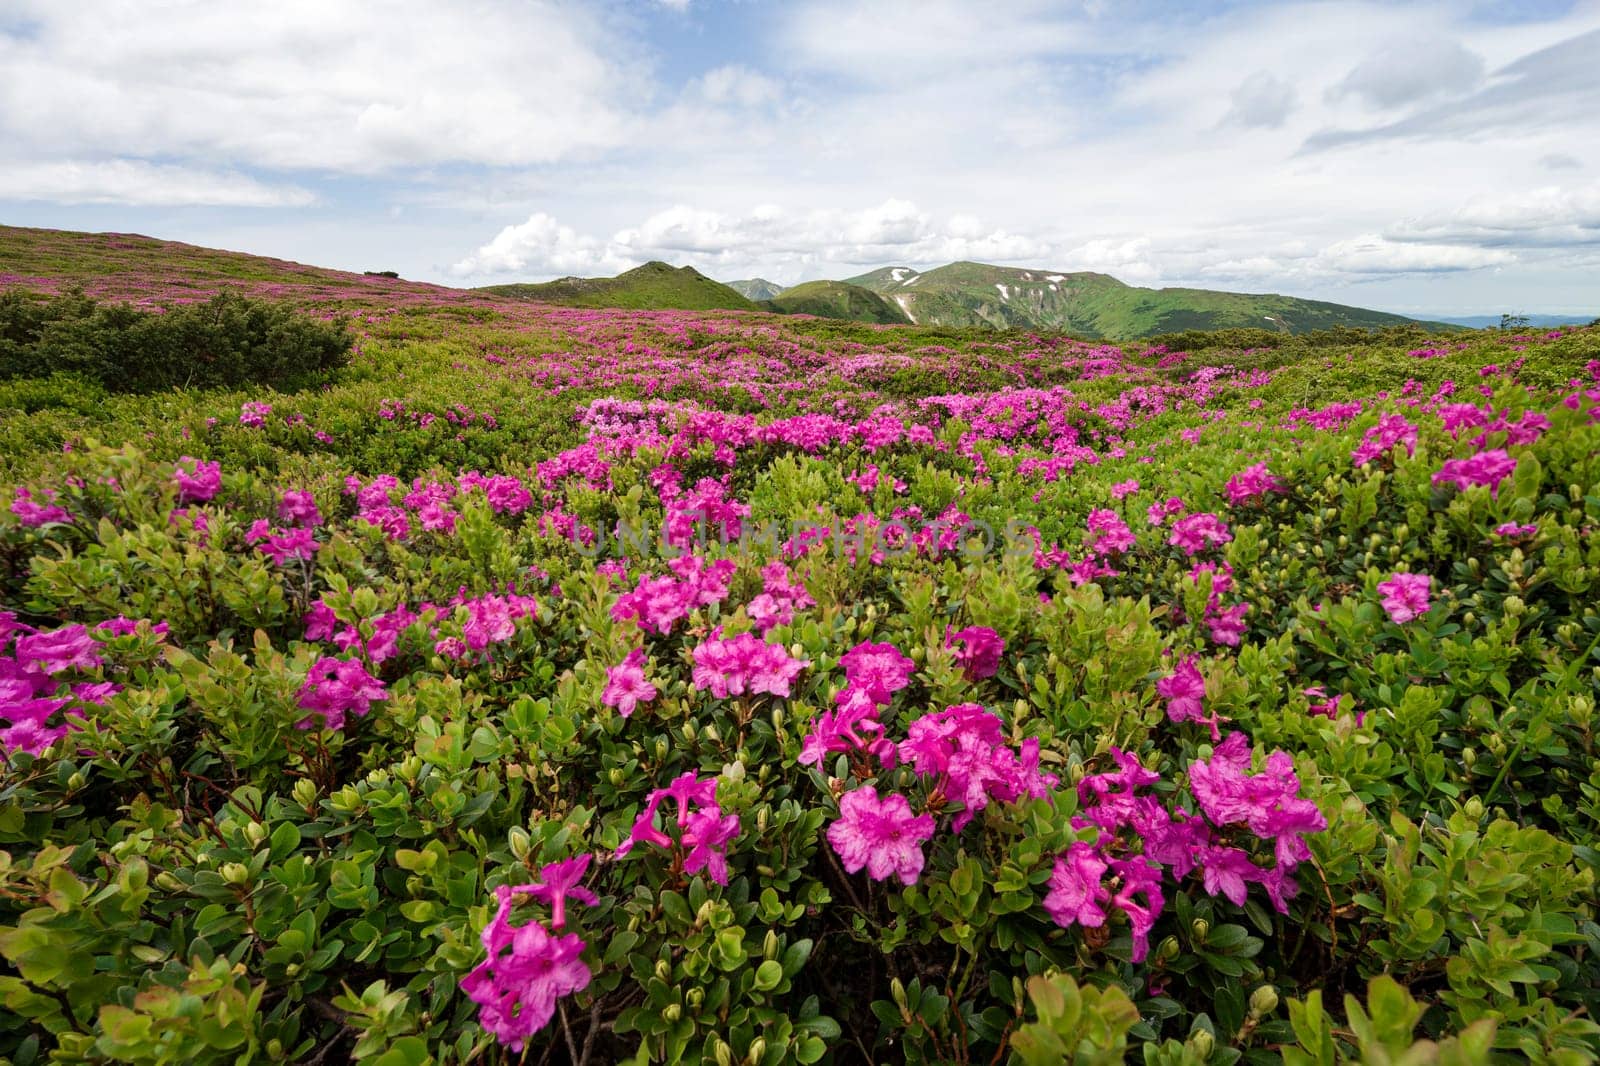 A meadow with flowering rhododendron bushes and a view of the Montenegrin mountain range, an incredible landscape with a magical mountain horizon.